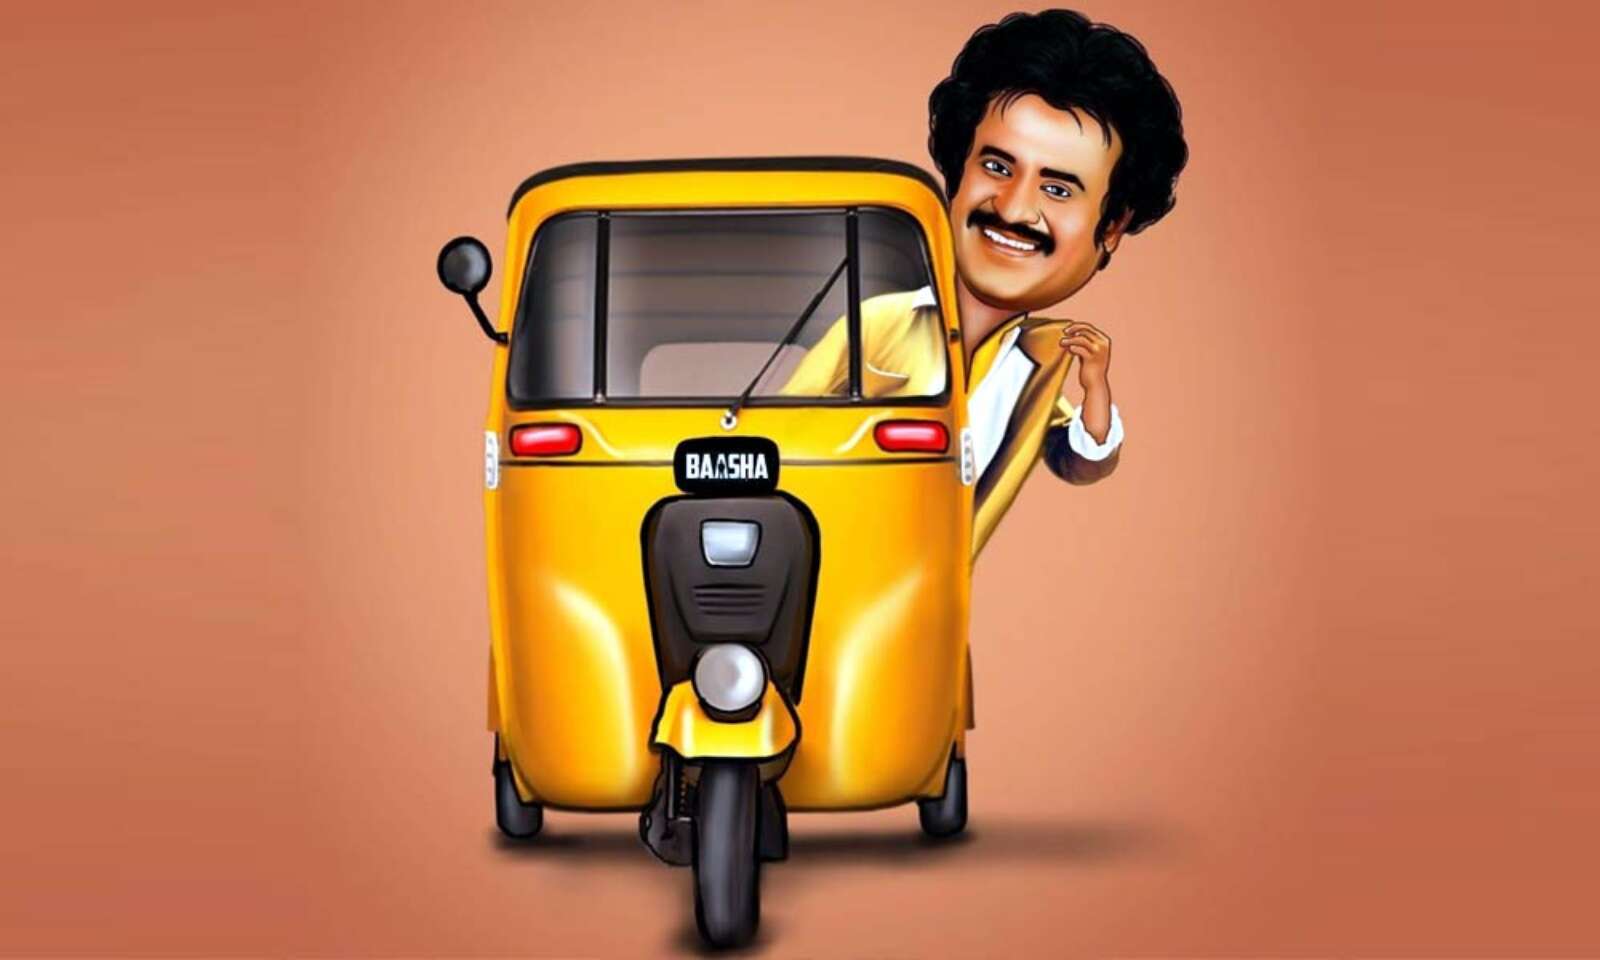 What will be Rajini's political party symbol?